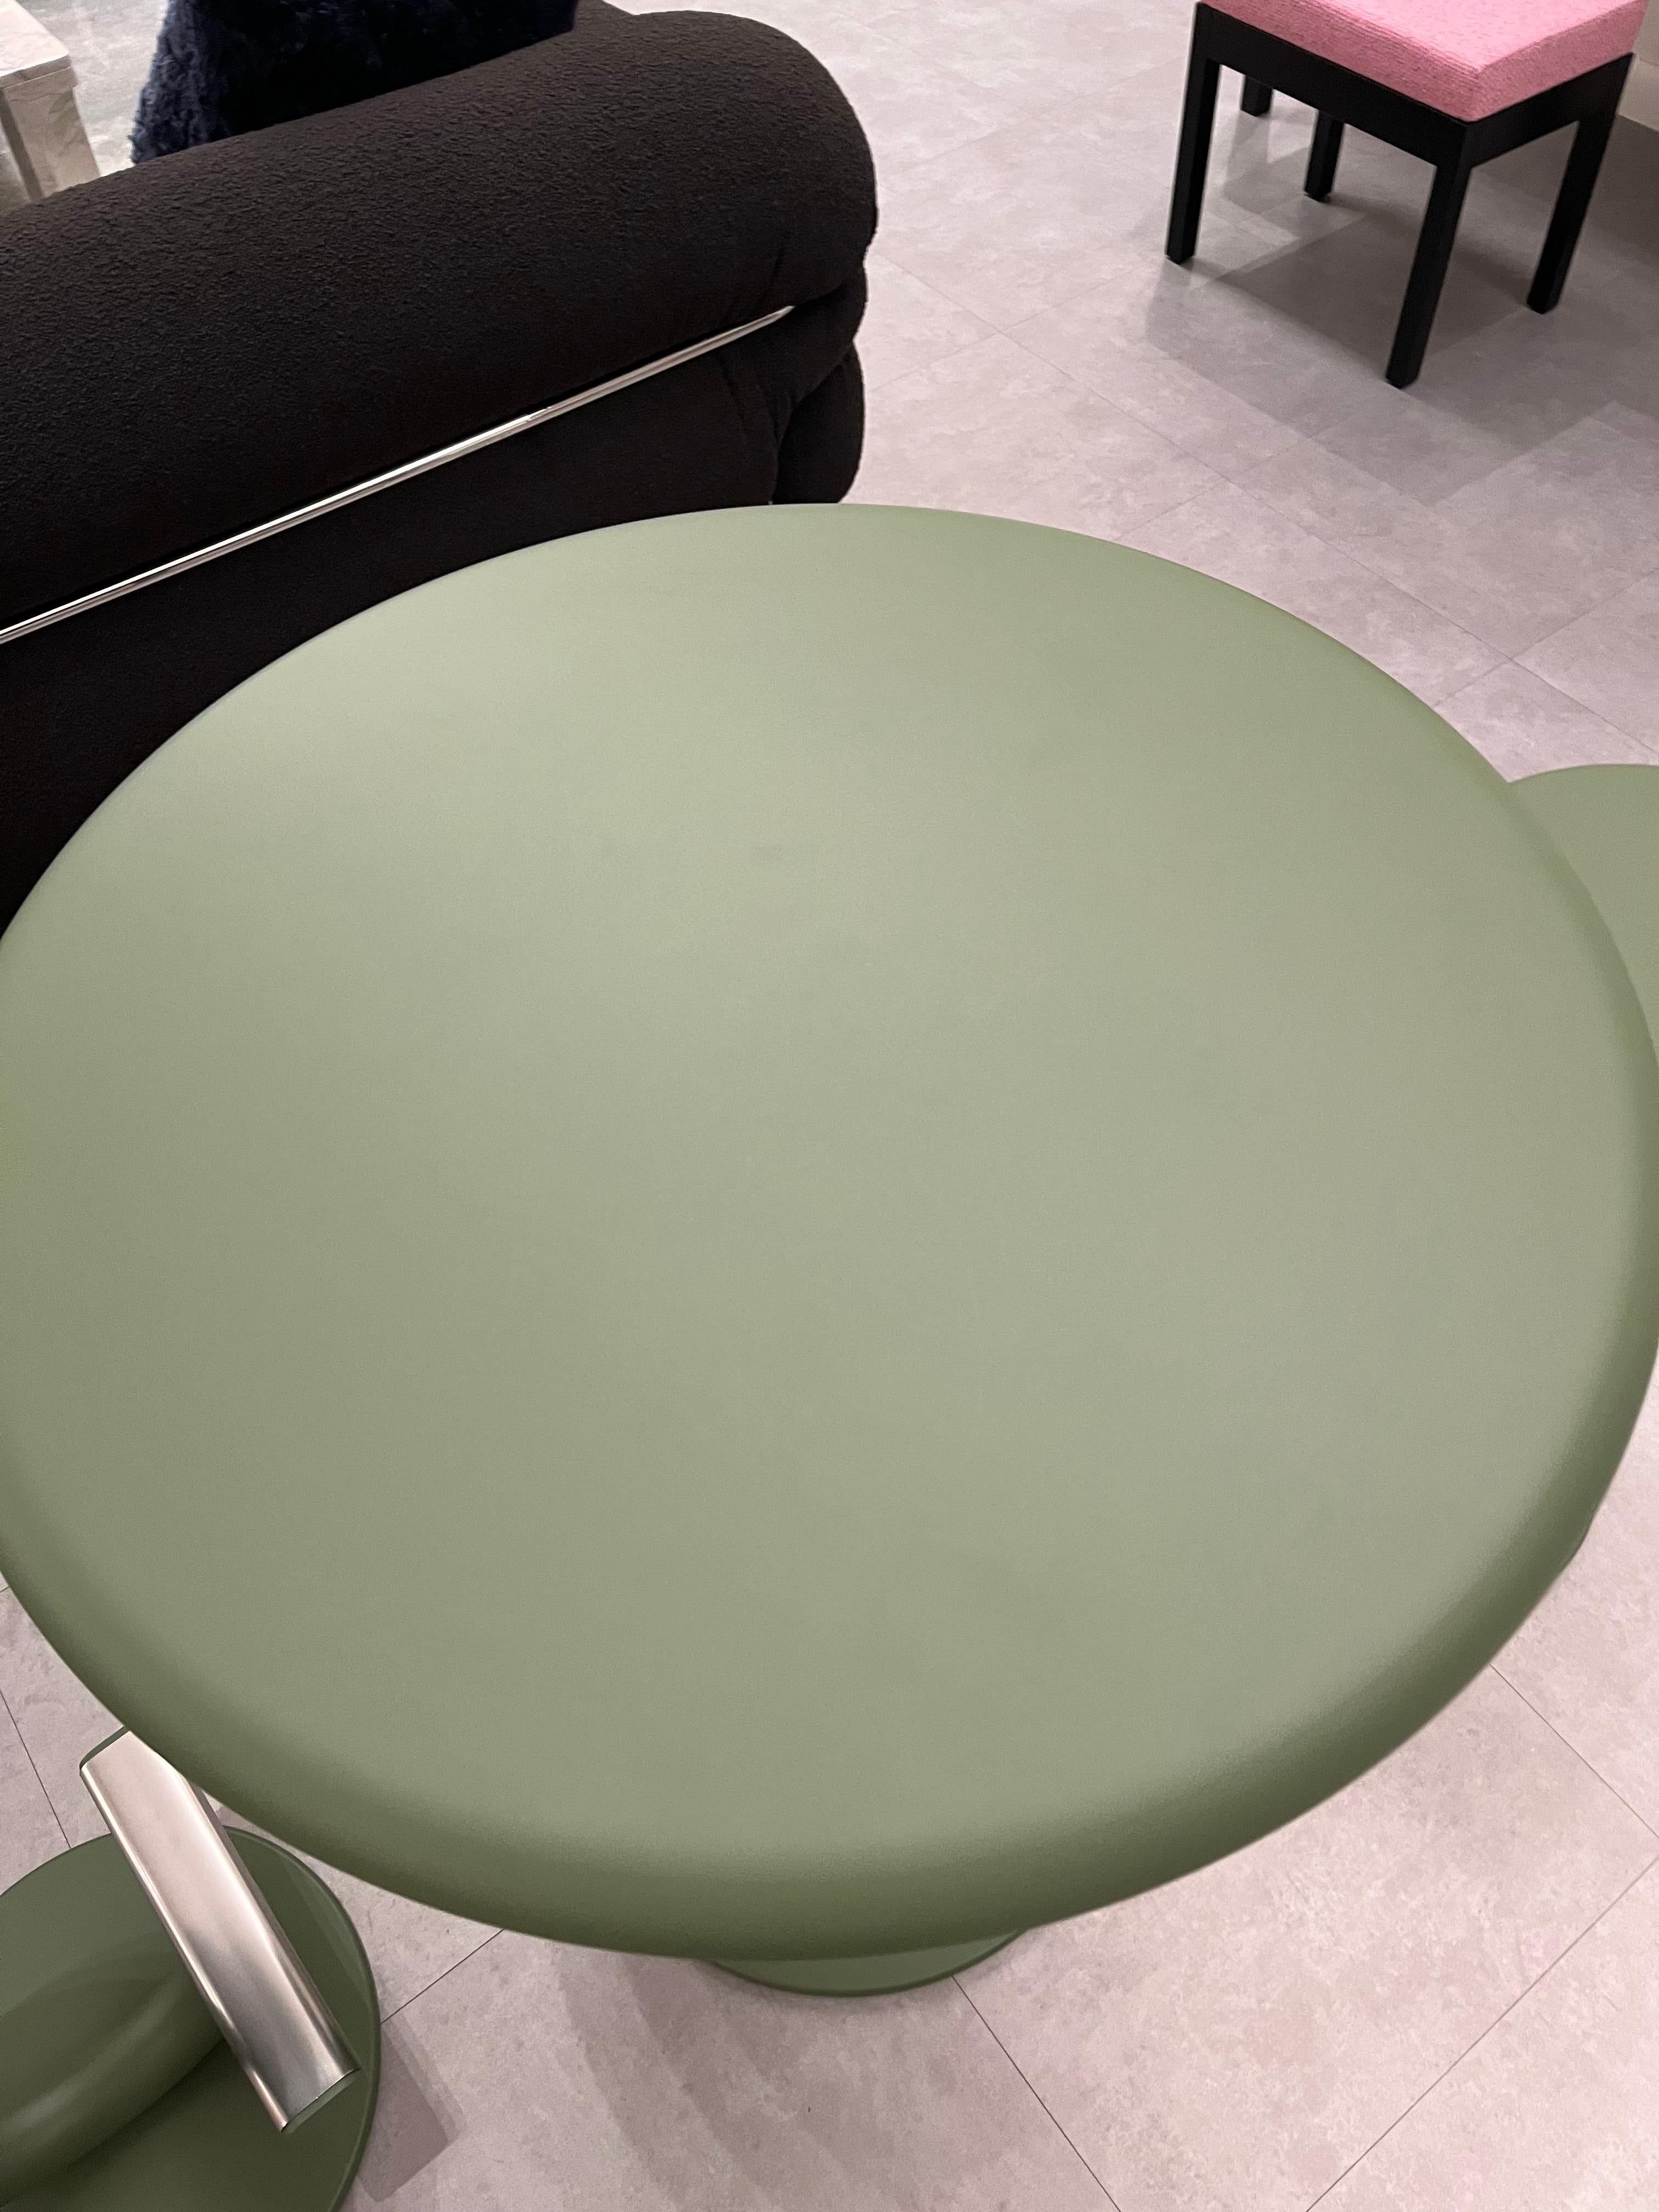 STRONG sgabello INDOOR h64
B85 moss green/SEAT B85 moss green
STRONG sedia TESSUTO
STRONG INDOOR top lamiera D70 h90
B85 moss green/TOP B85 moss green
Strong stool :It’s the idea of using art to shape new ideas, taking the shortest road for the